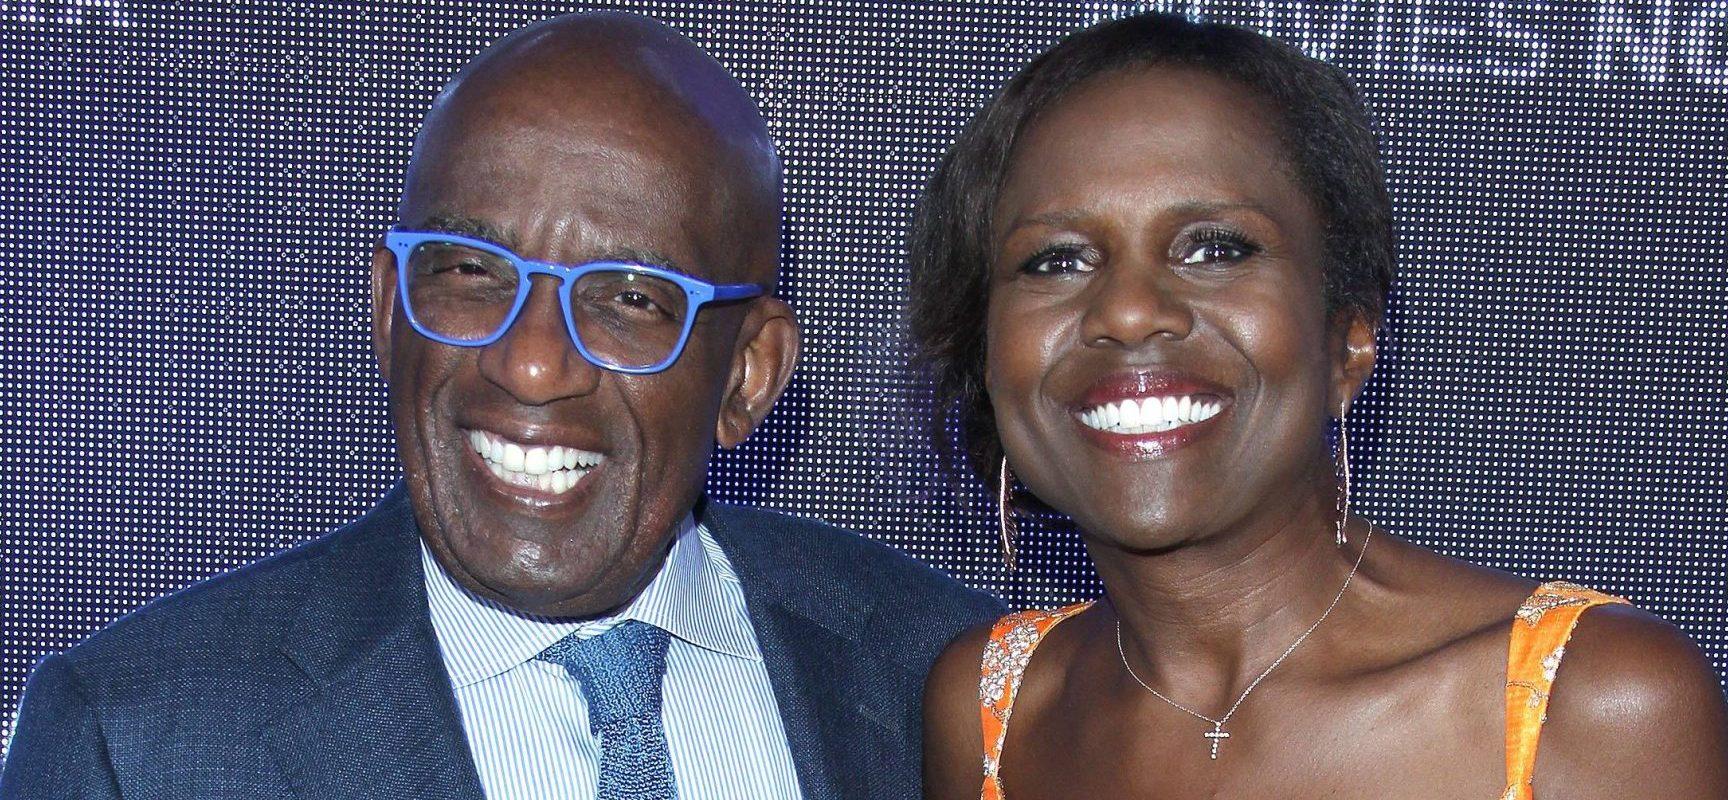 Al Roker and wife Deborah Roberts at Hallmark Channel And Hallmark Movies and Mysteries Summer 2019 TCA Press Tour Event